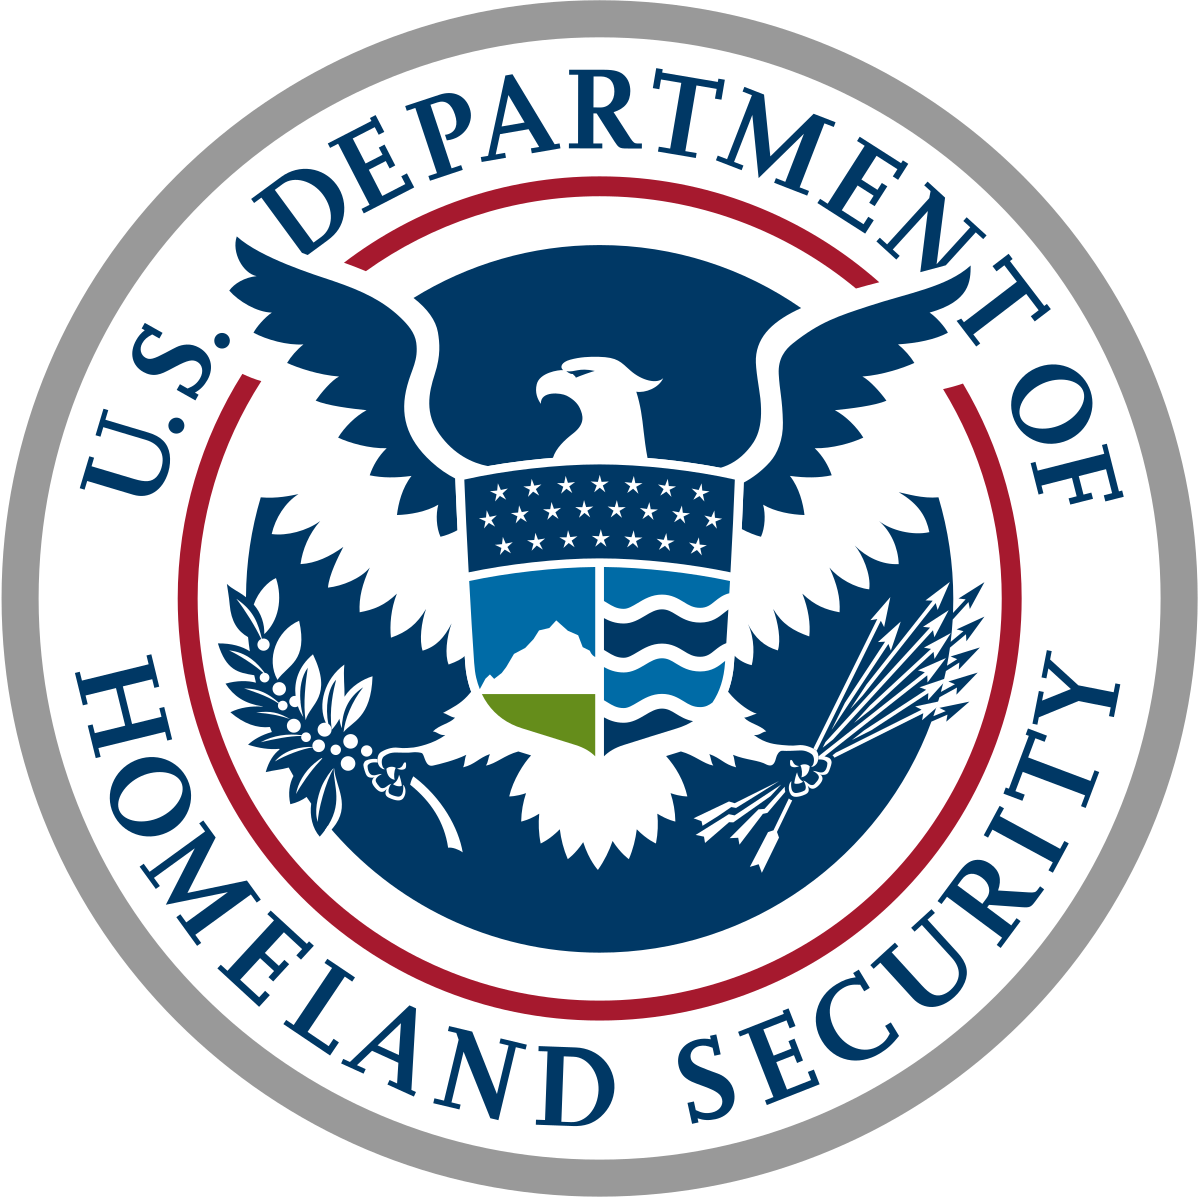  The Homeland Threat Assessment is the first time the Department of Homeland Security has published such a report. (Source: Wikimedia Commons)